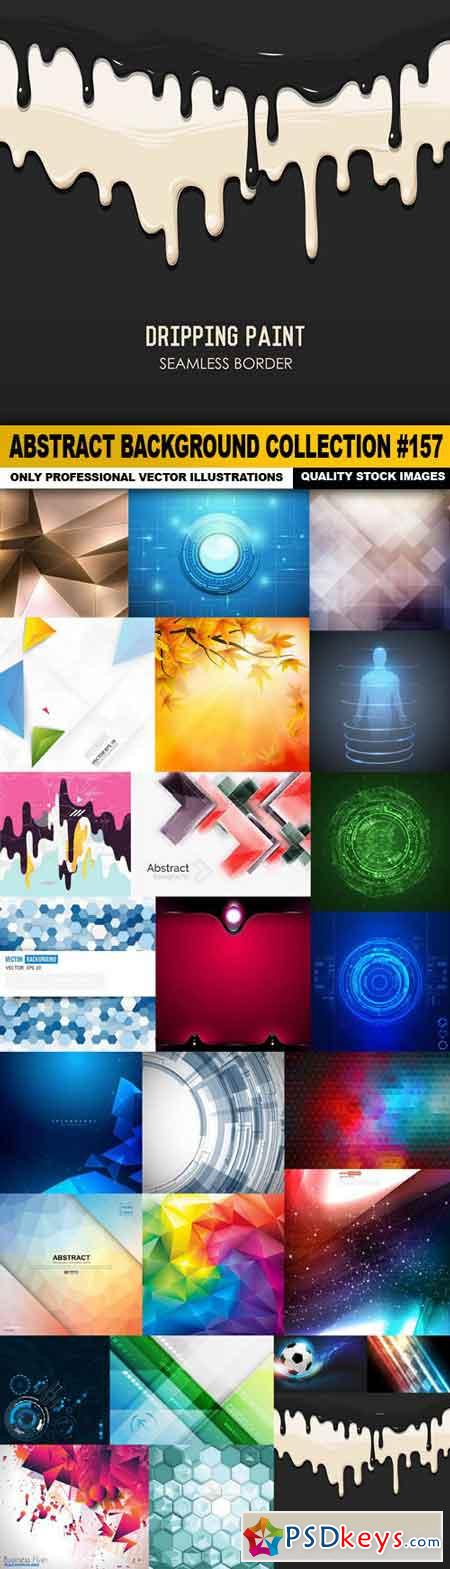 Abstract Background Collection #157 - 25 Vector